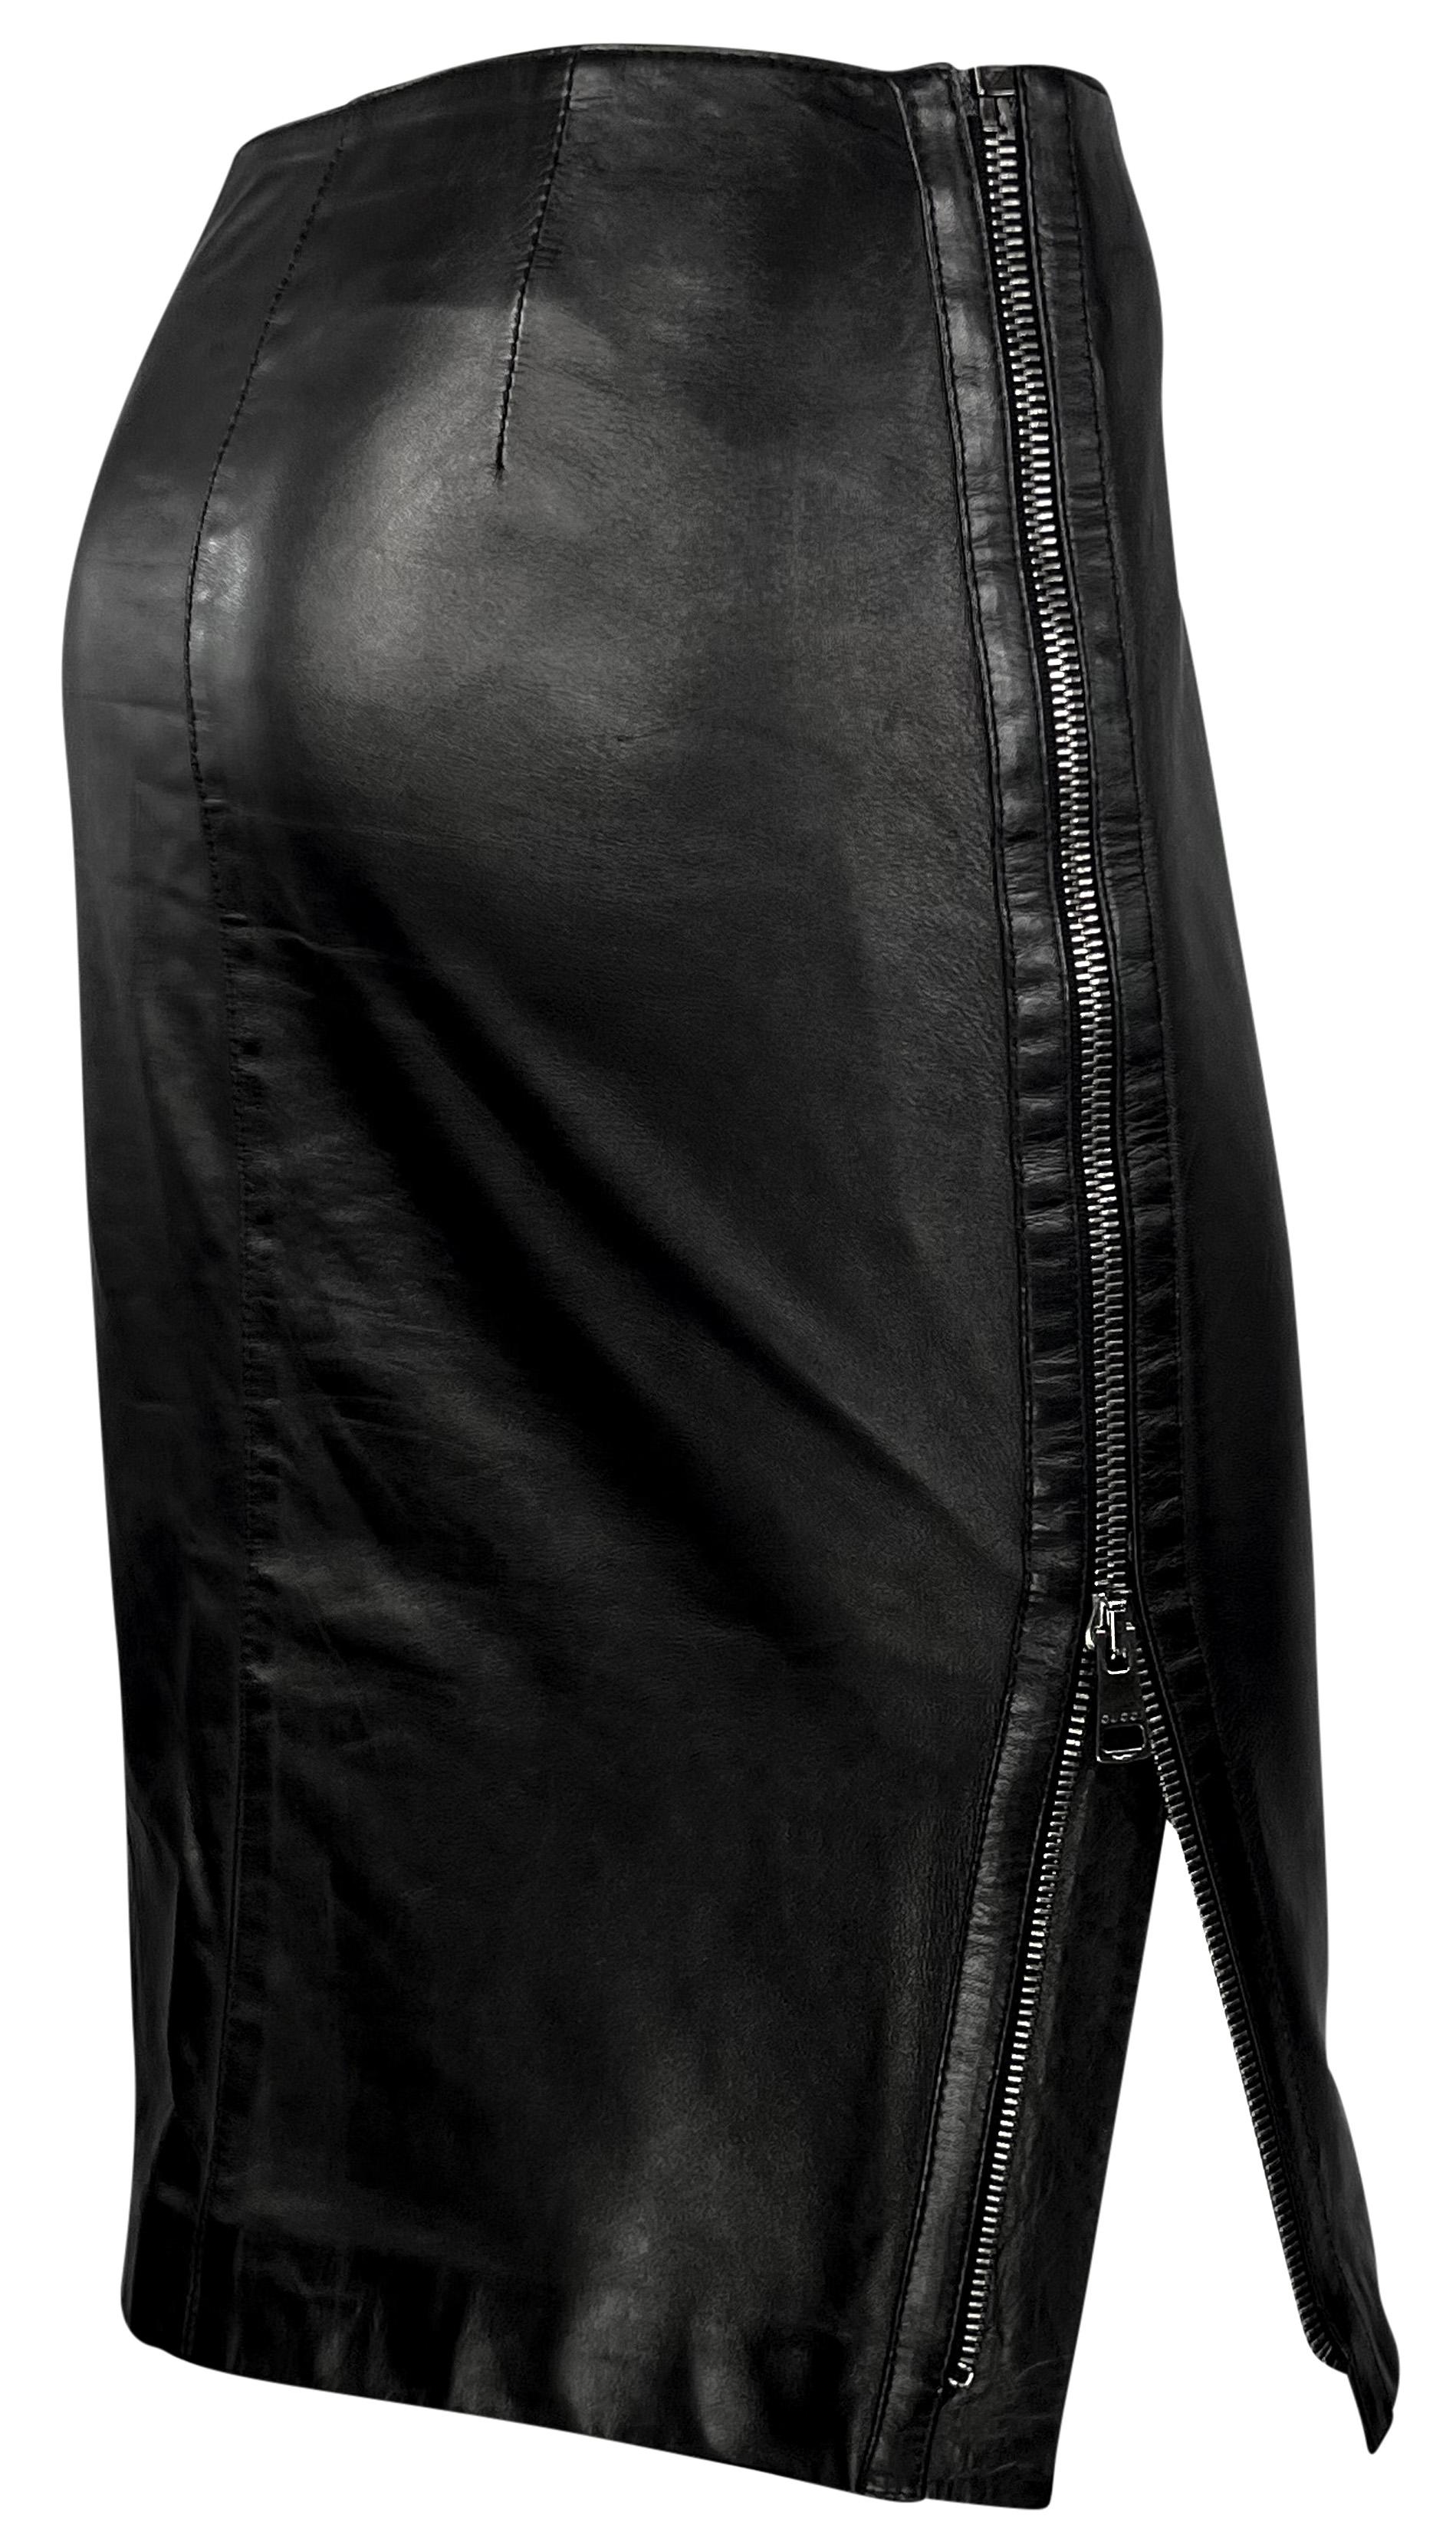 From the Fall/Winter 2001 collection, this black Gucci by Tom Ford skirt is constructed entirely of leather. Accented with a large zipper on one side, a design Ford later brought to his own label; this leather Gucci skirt is an elevated closet